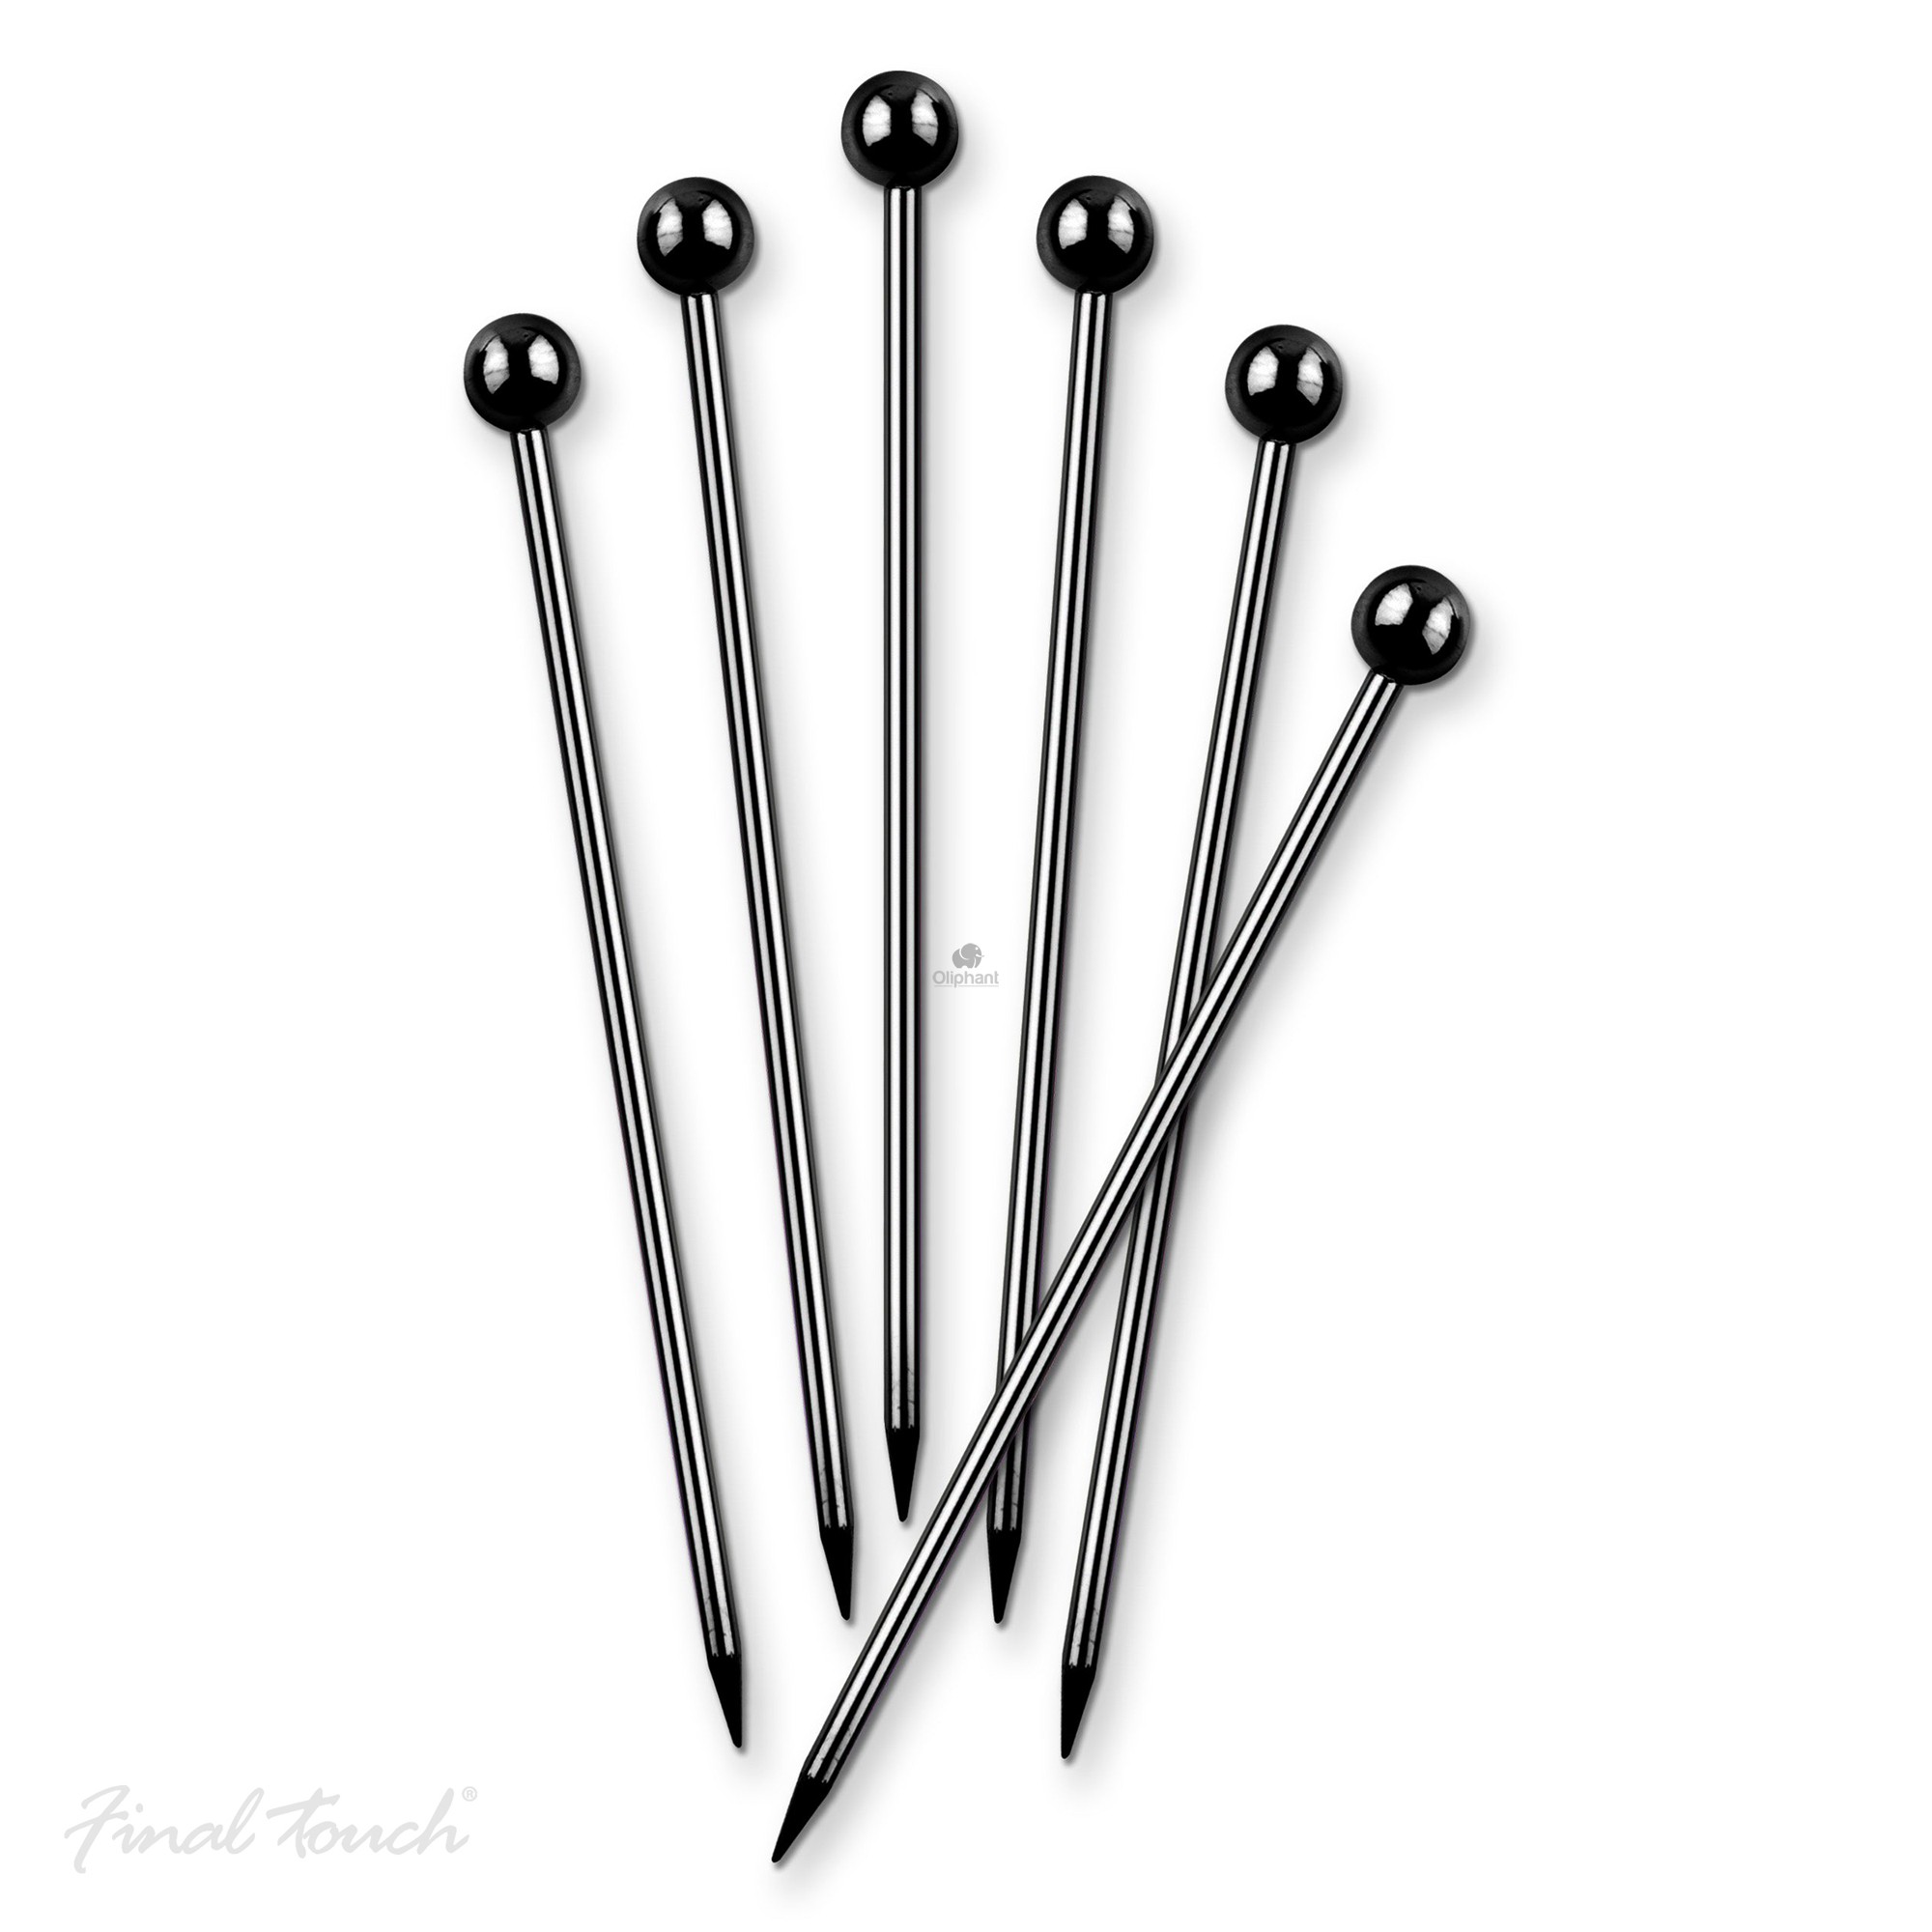 Final Touch Stainless Steel Cocktail Picks - Black Chrome Finish - Set of 6